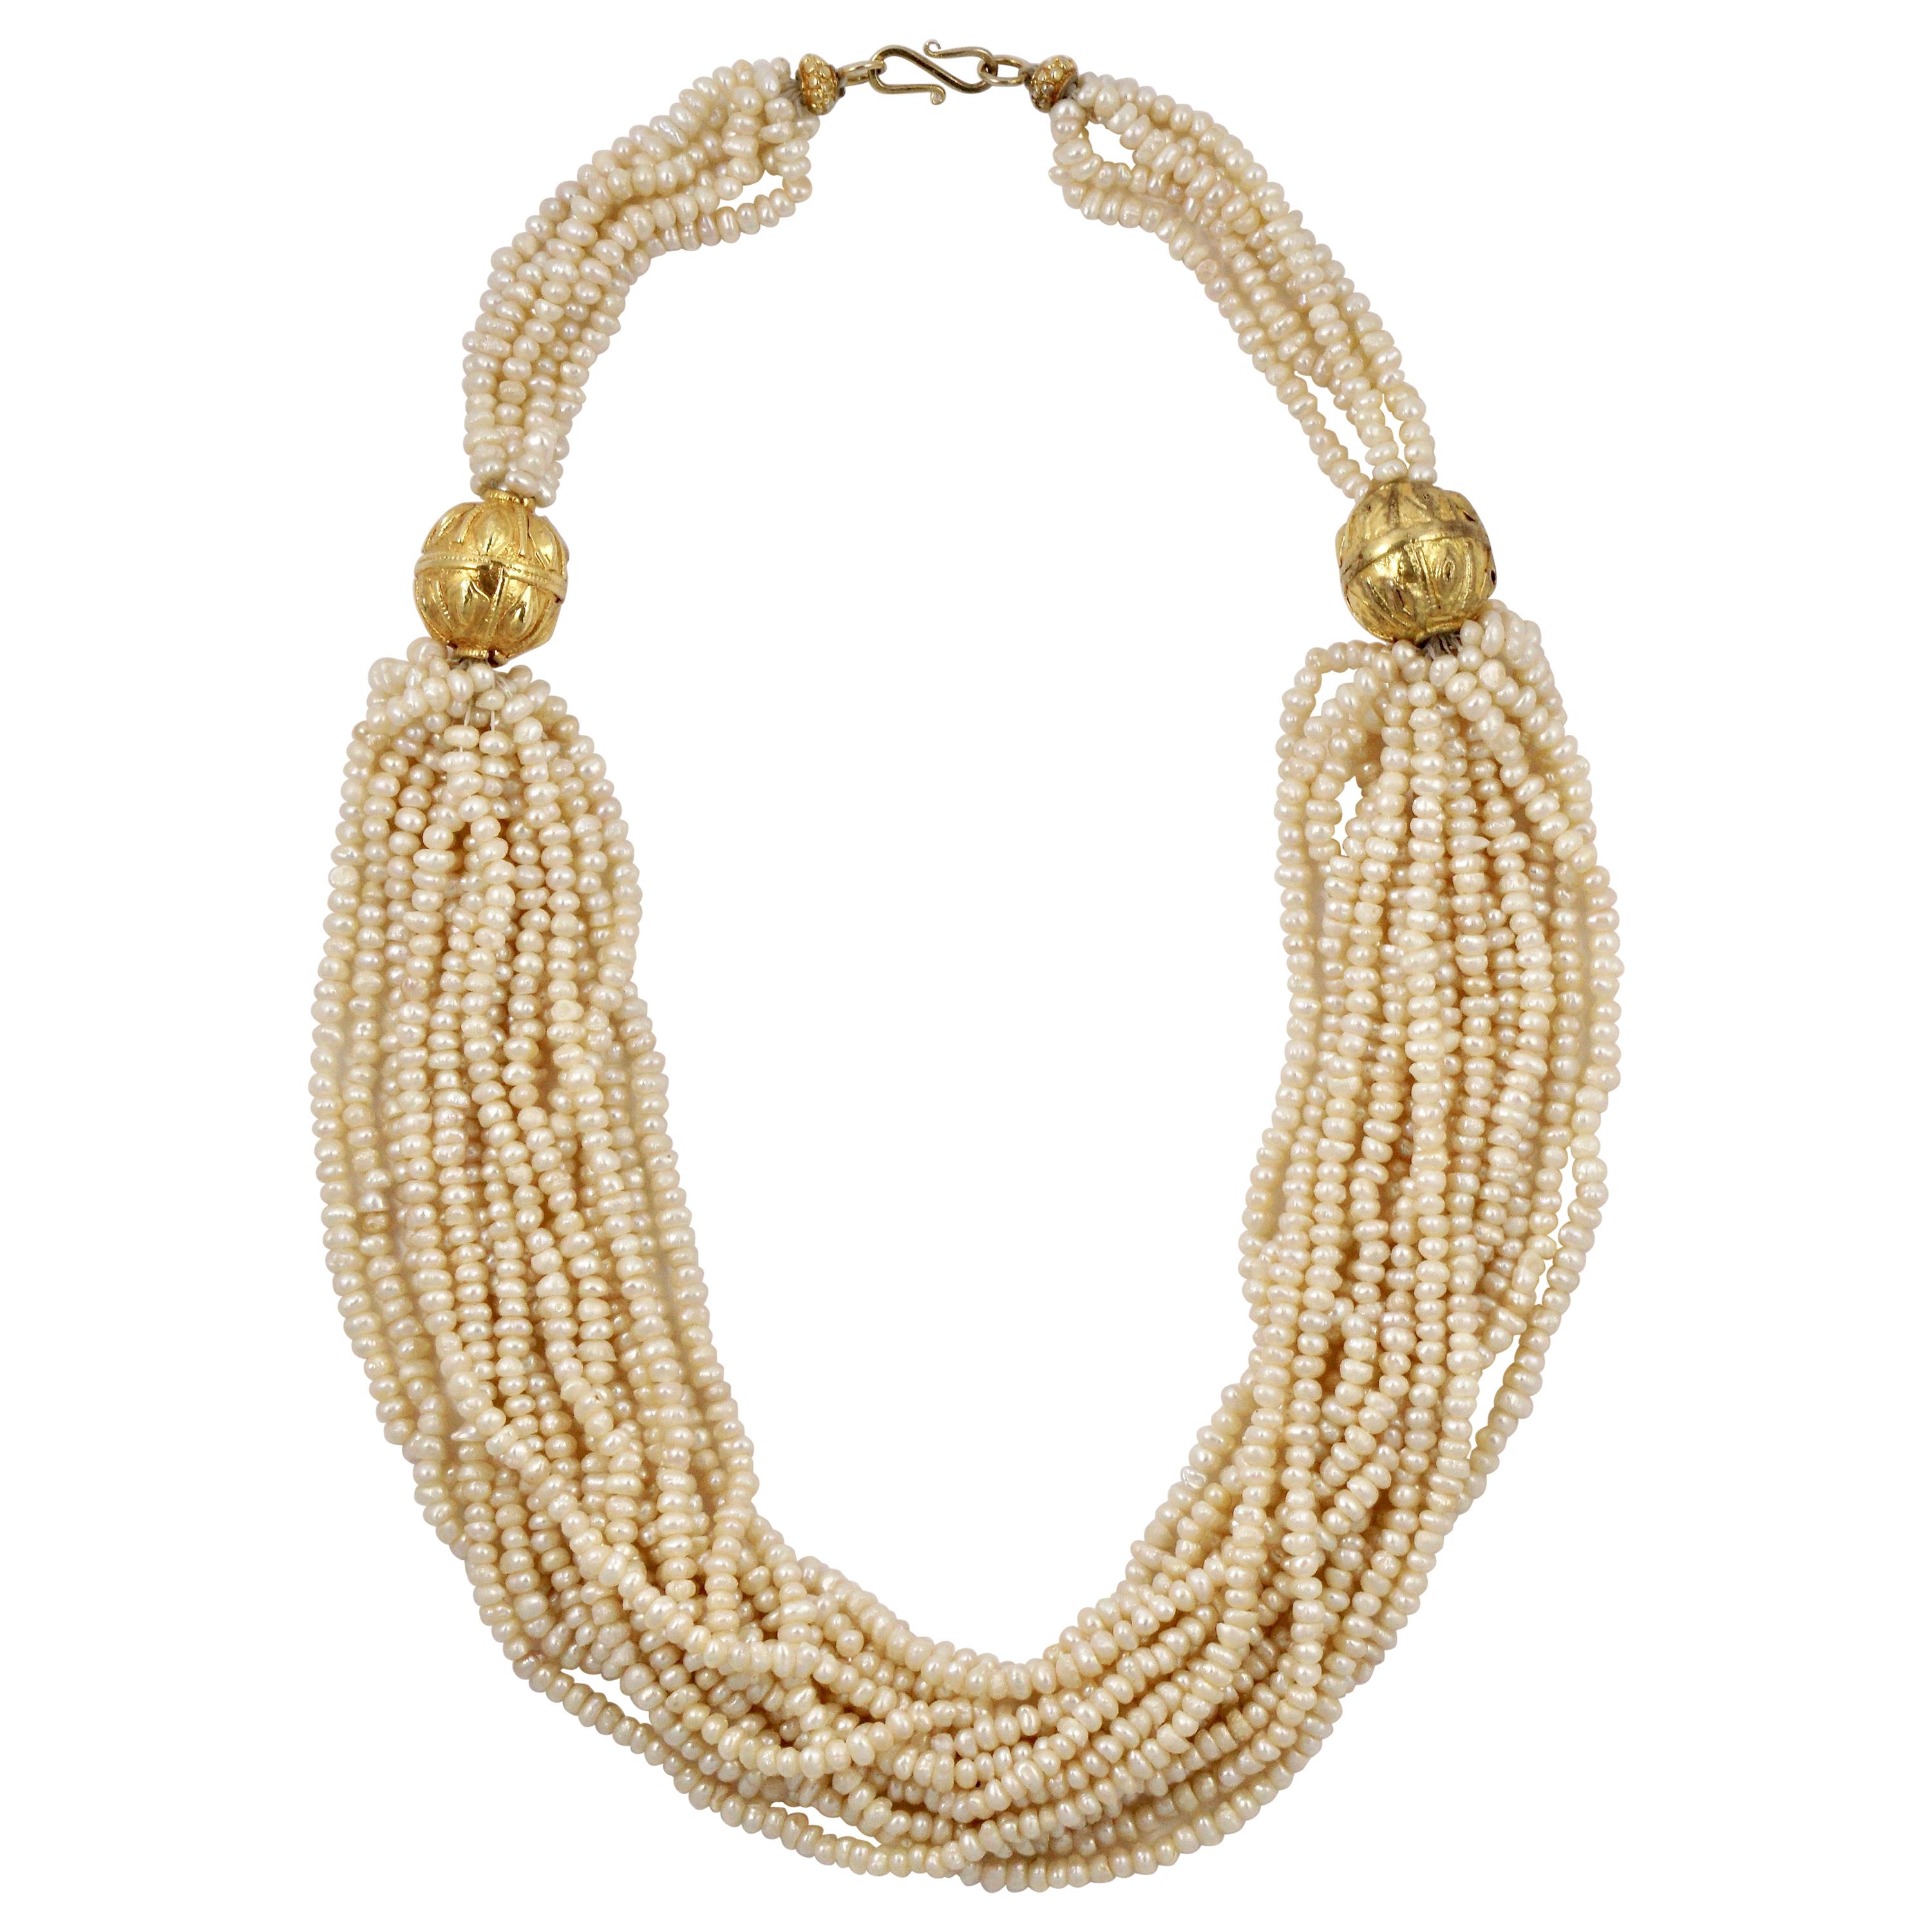 Berber Gold Plated Morrocan Multi Strand Freshwater Pearl Statement Necklace